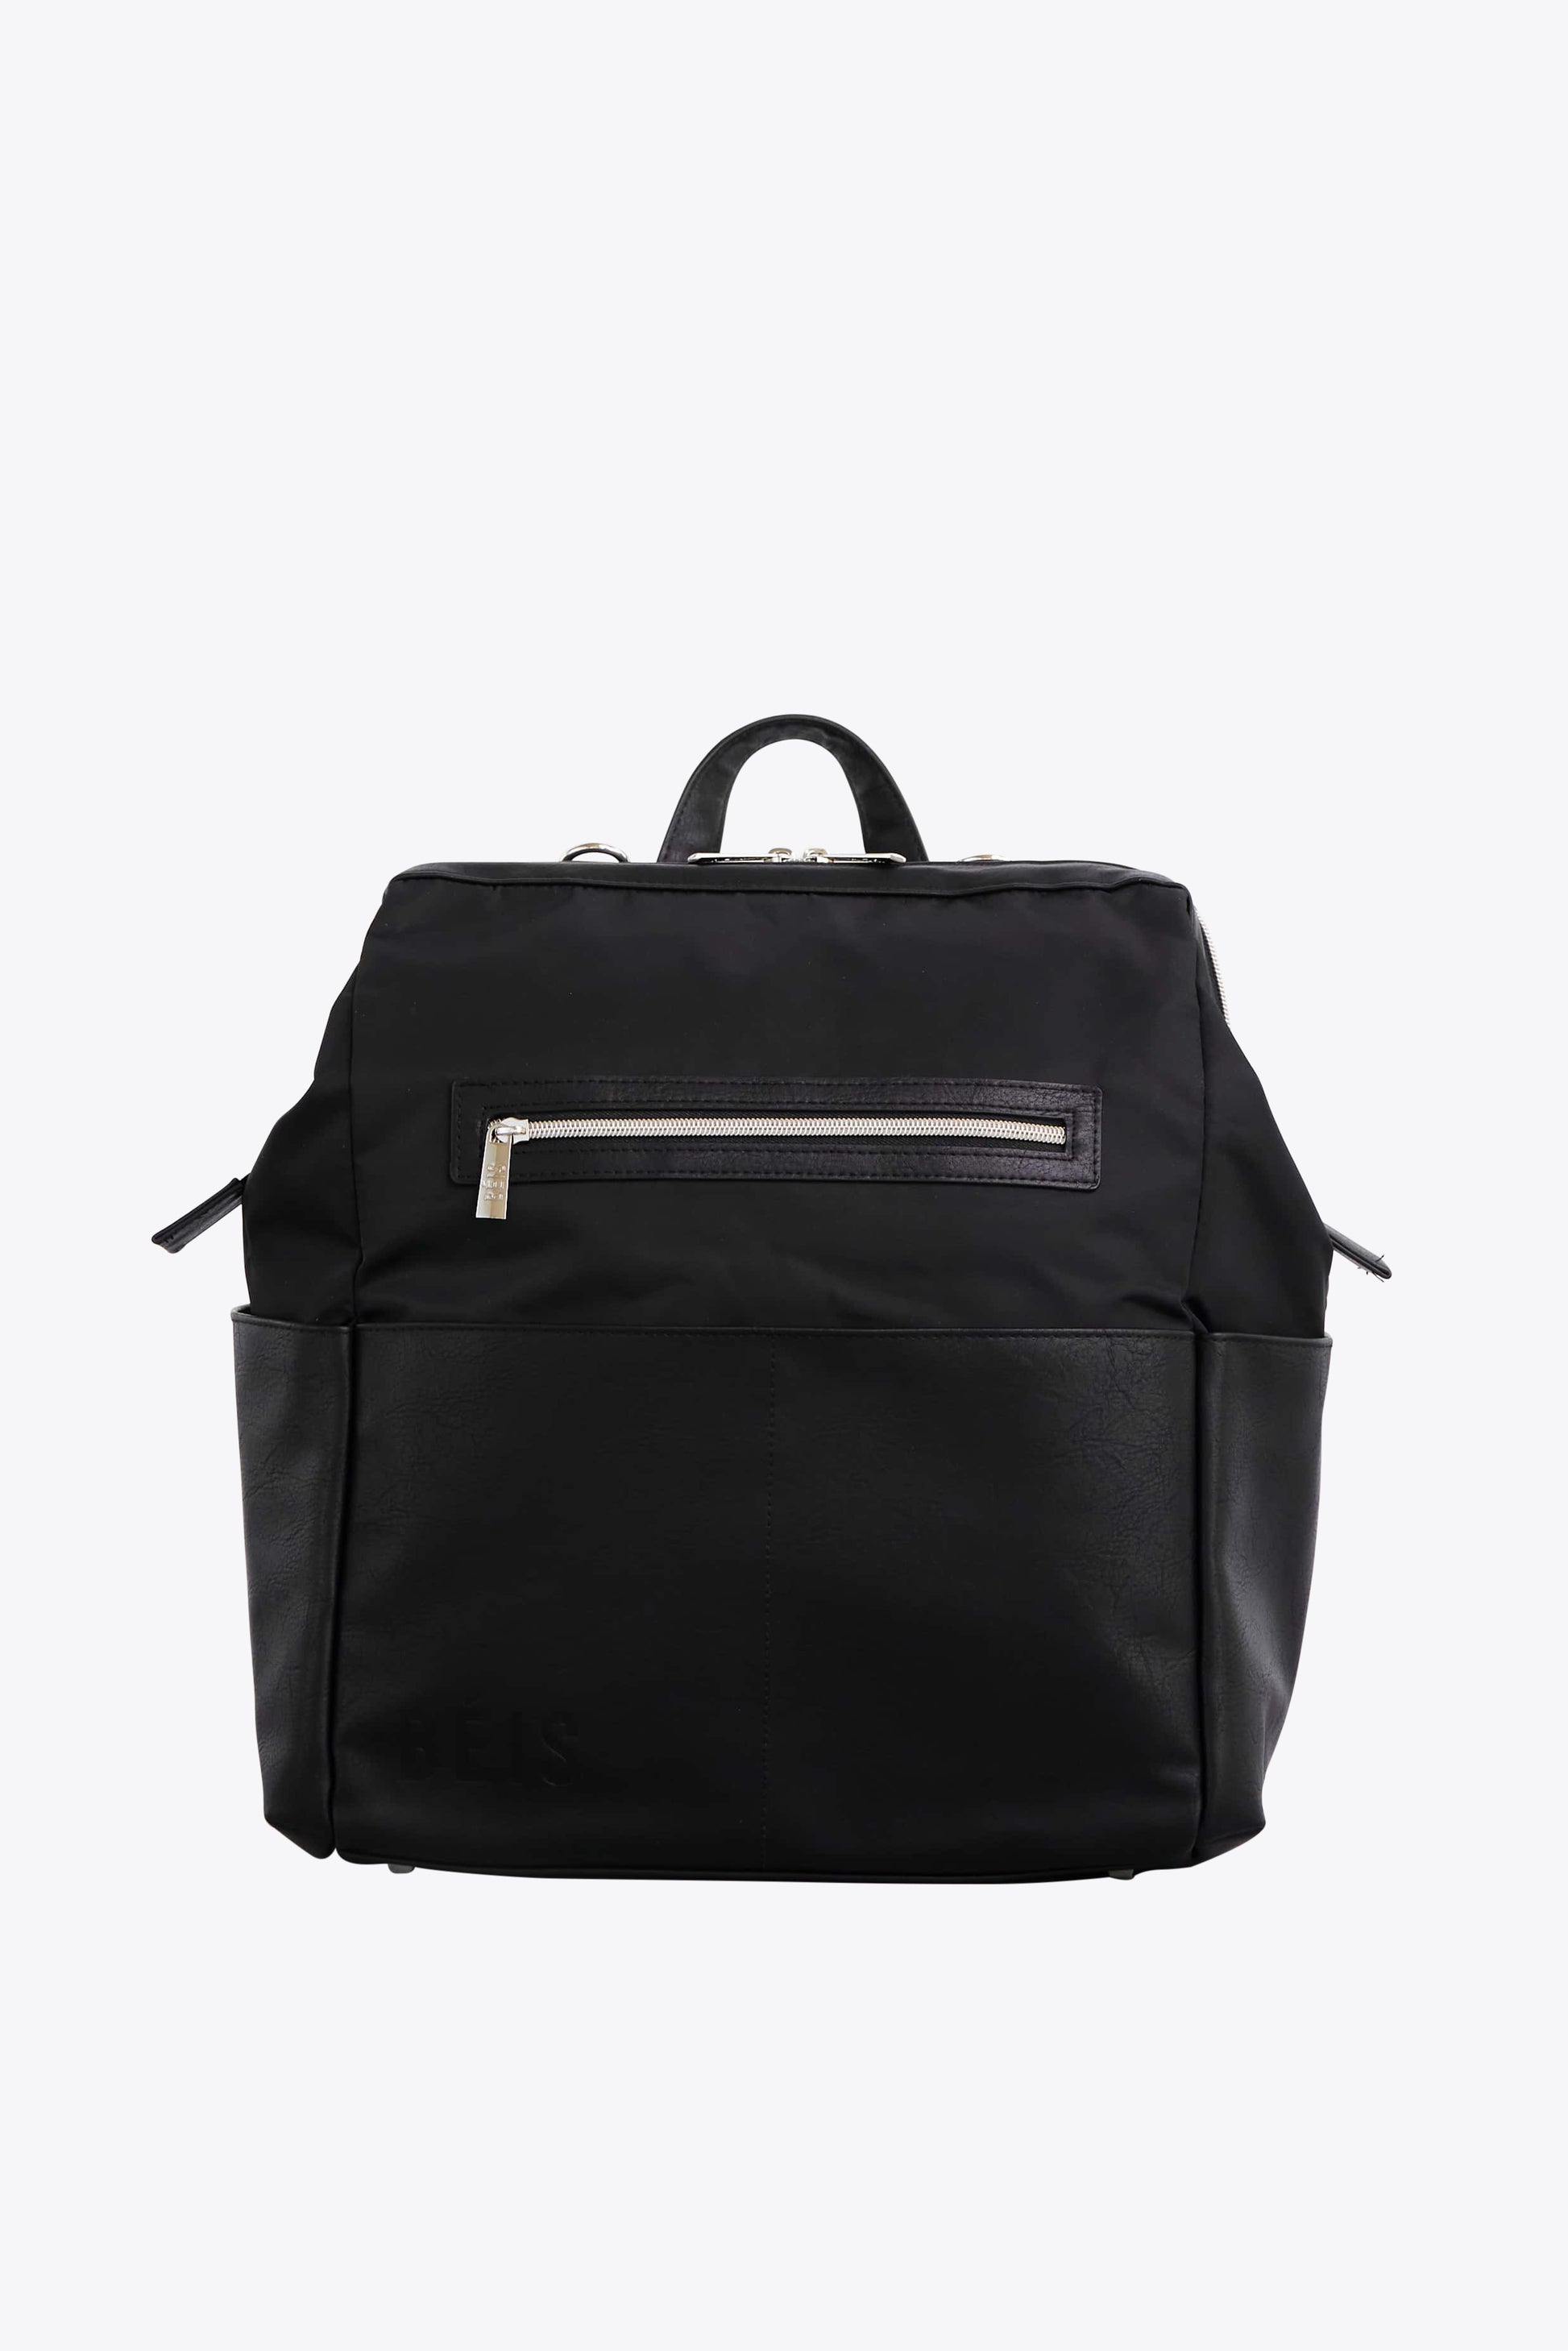 What is everyone's thoughts on this bag? I'm mainly torn on the